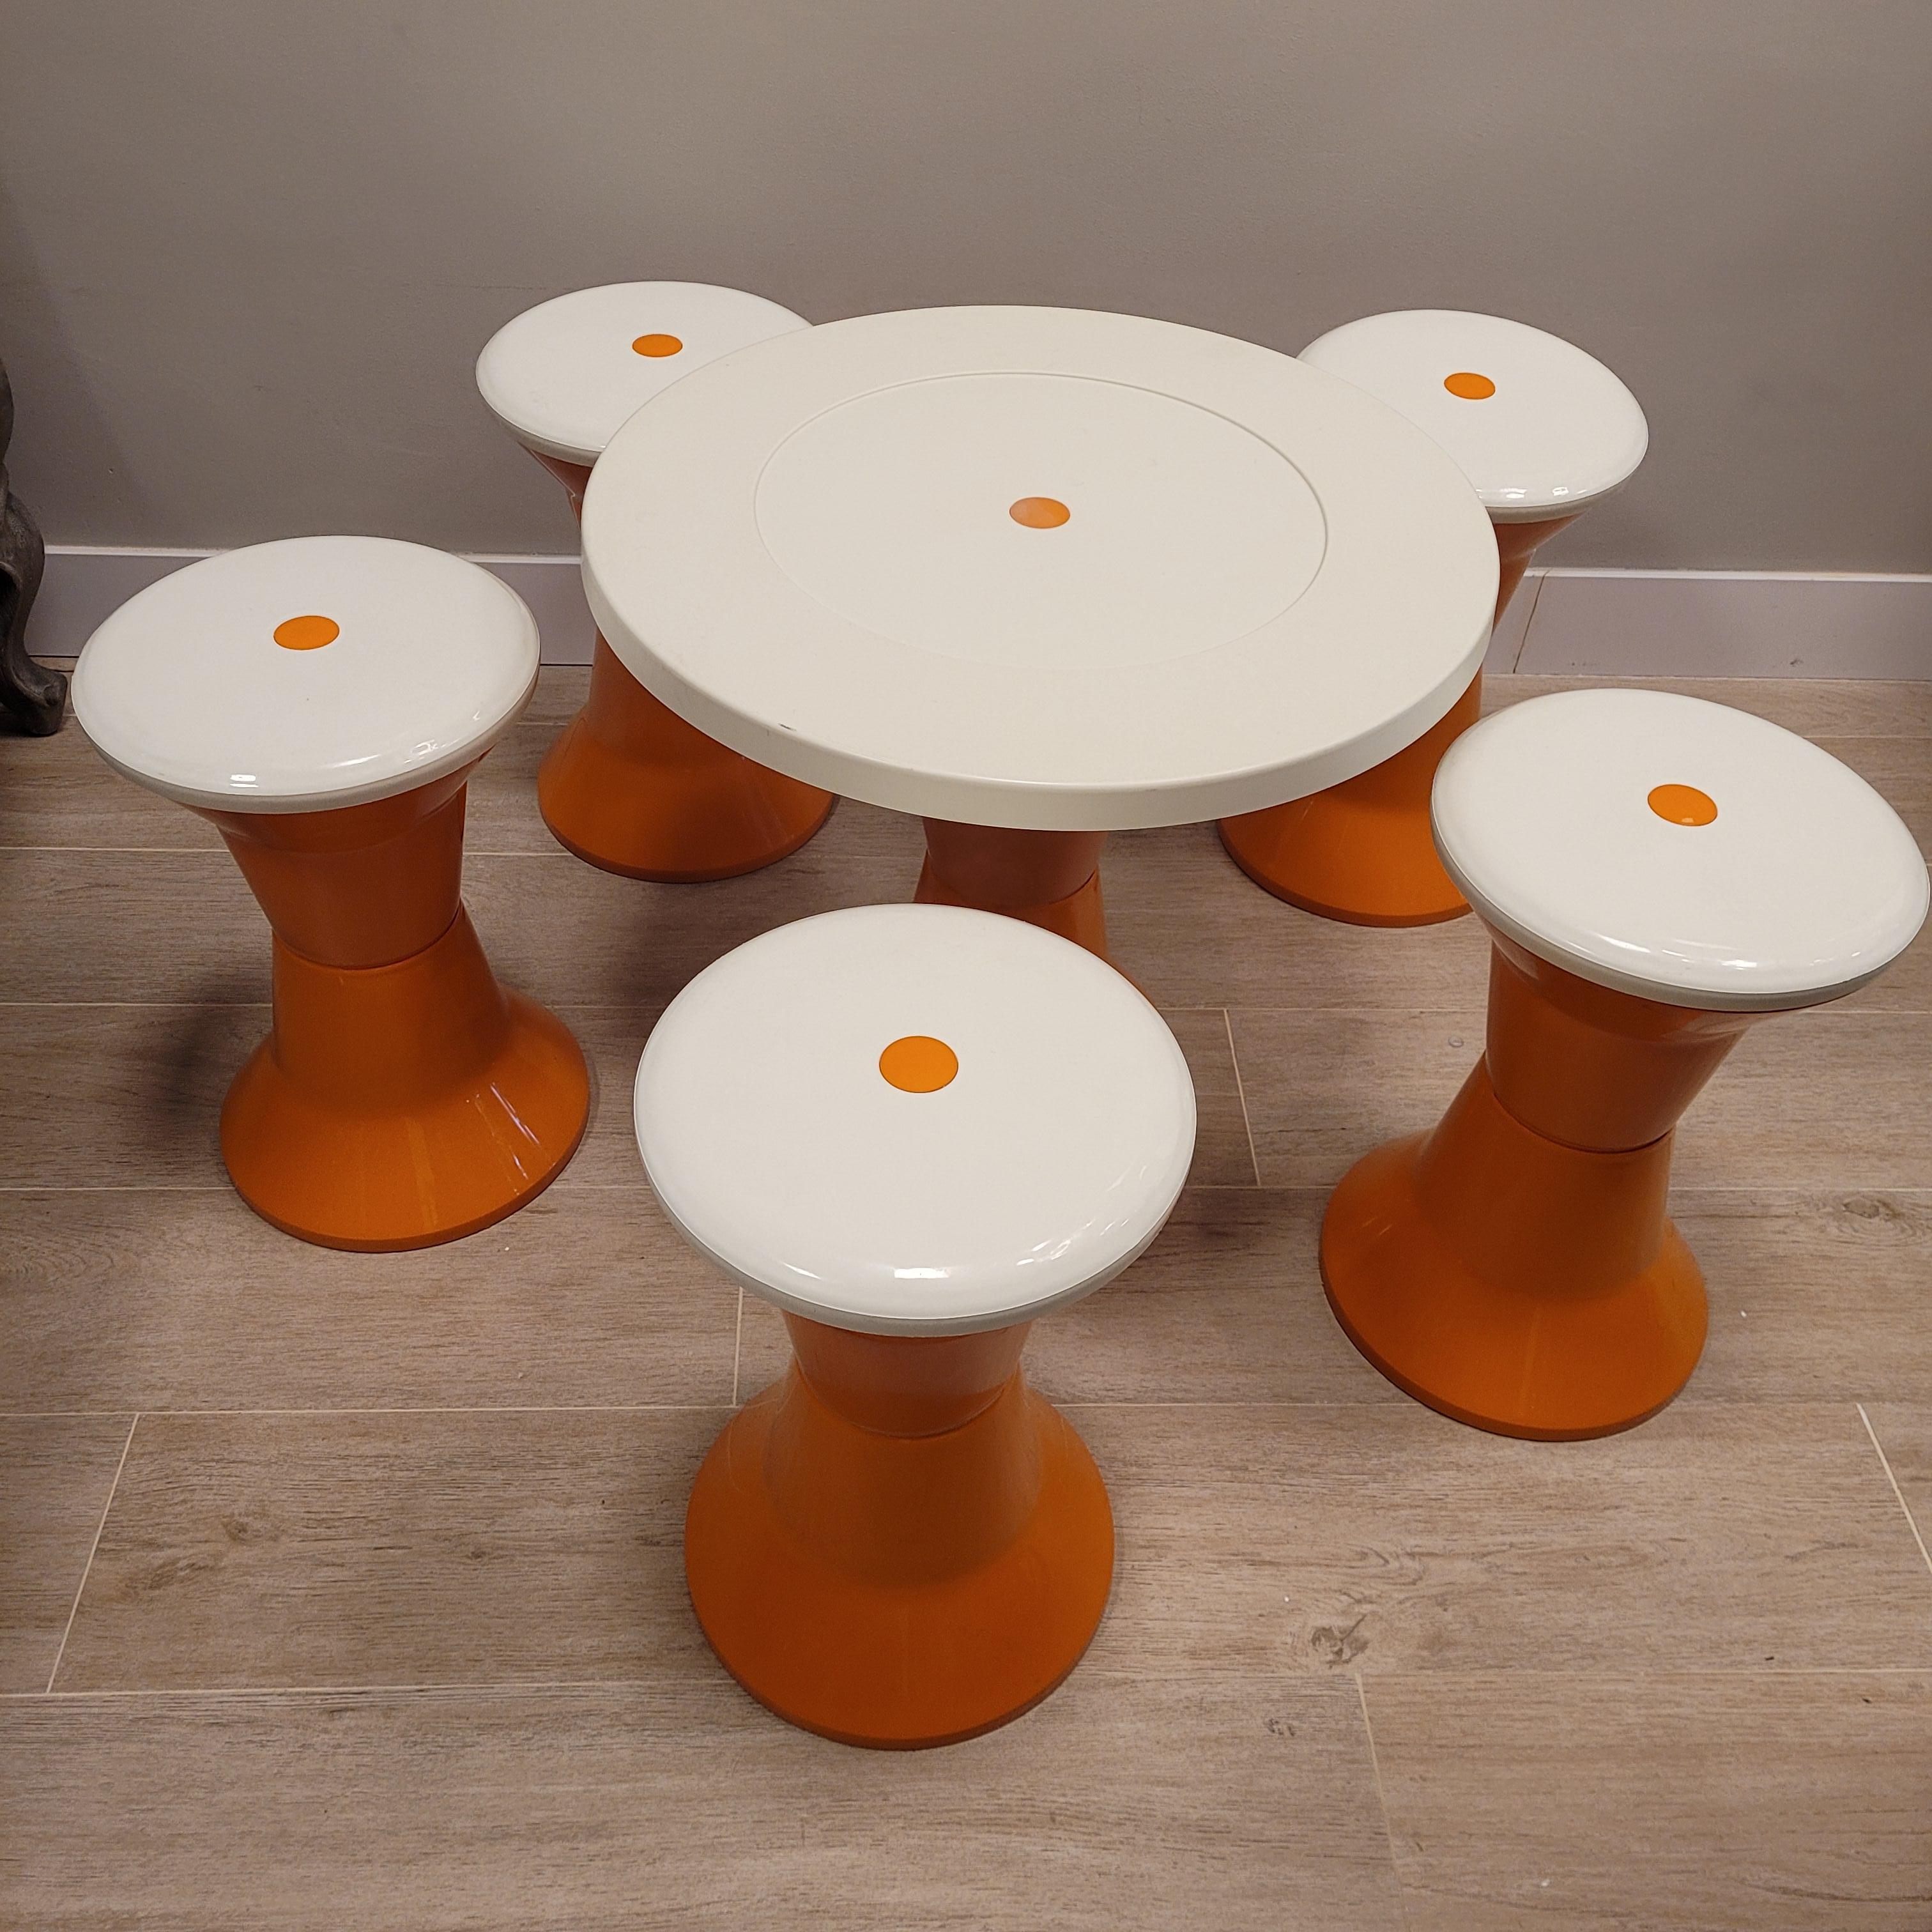 The Tam - Tam stool is an essential piece of furniture from the 20th century. It was created in 1968 by the French designer Henry Massonet. This plastic stool was originally a removable, elevated seat for fishing enthusiasts. Its careful